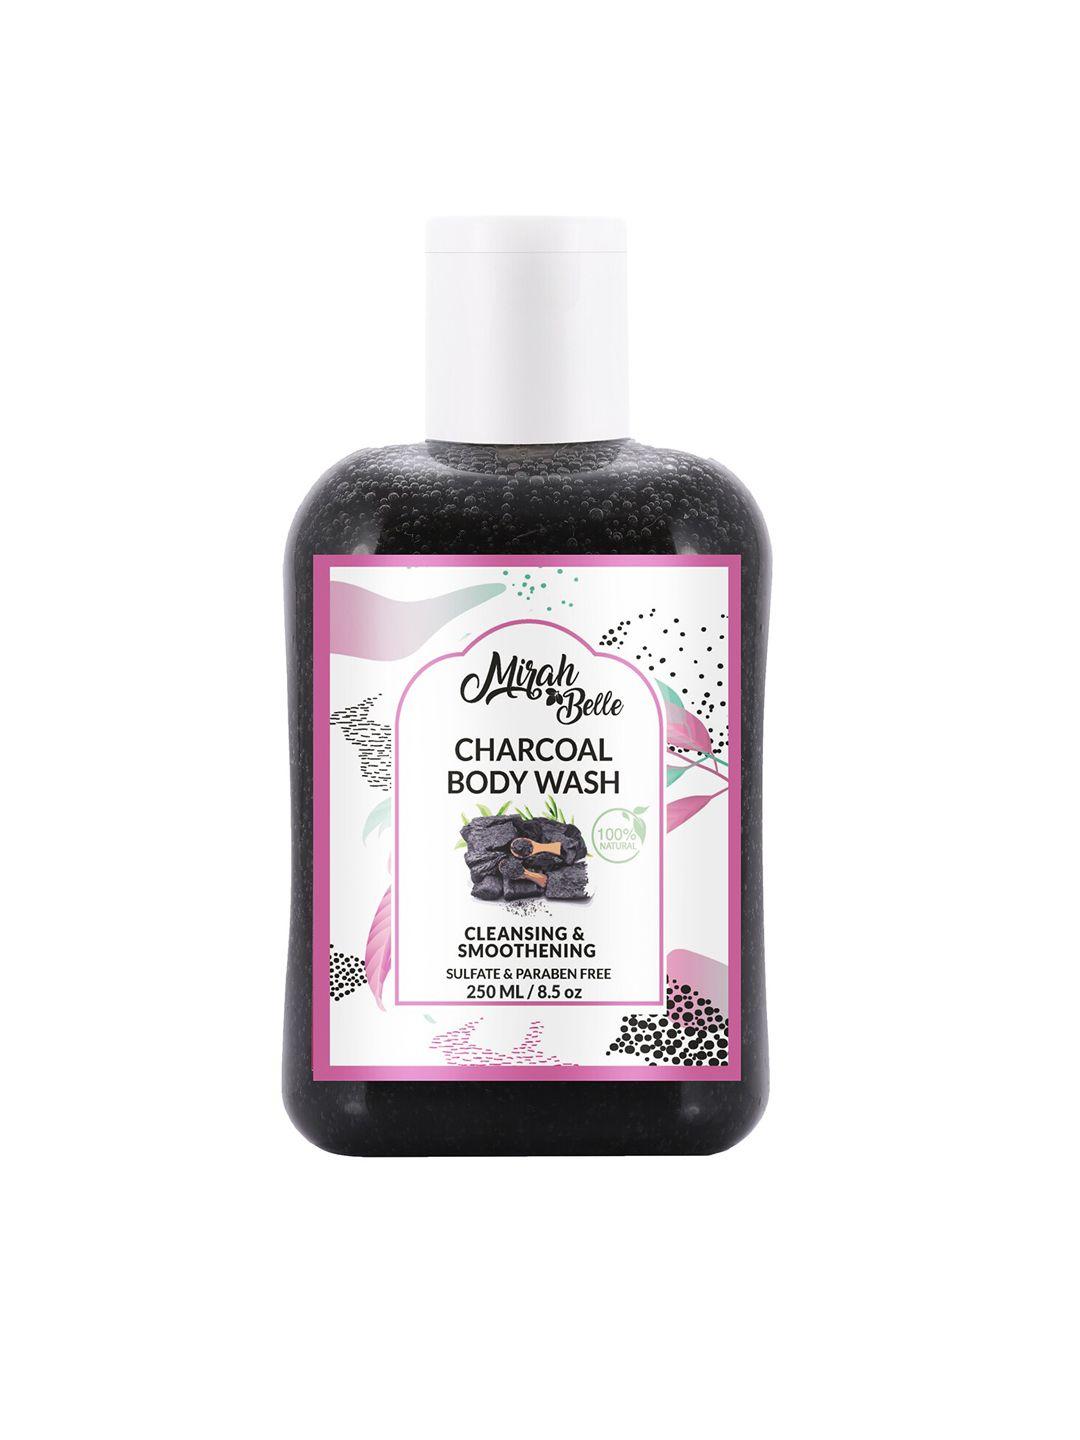 mirah belle unisex black activated charcoal natural body wash 250 ml